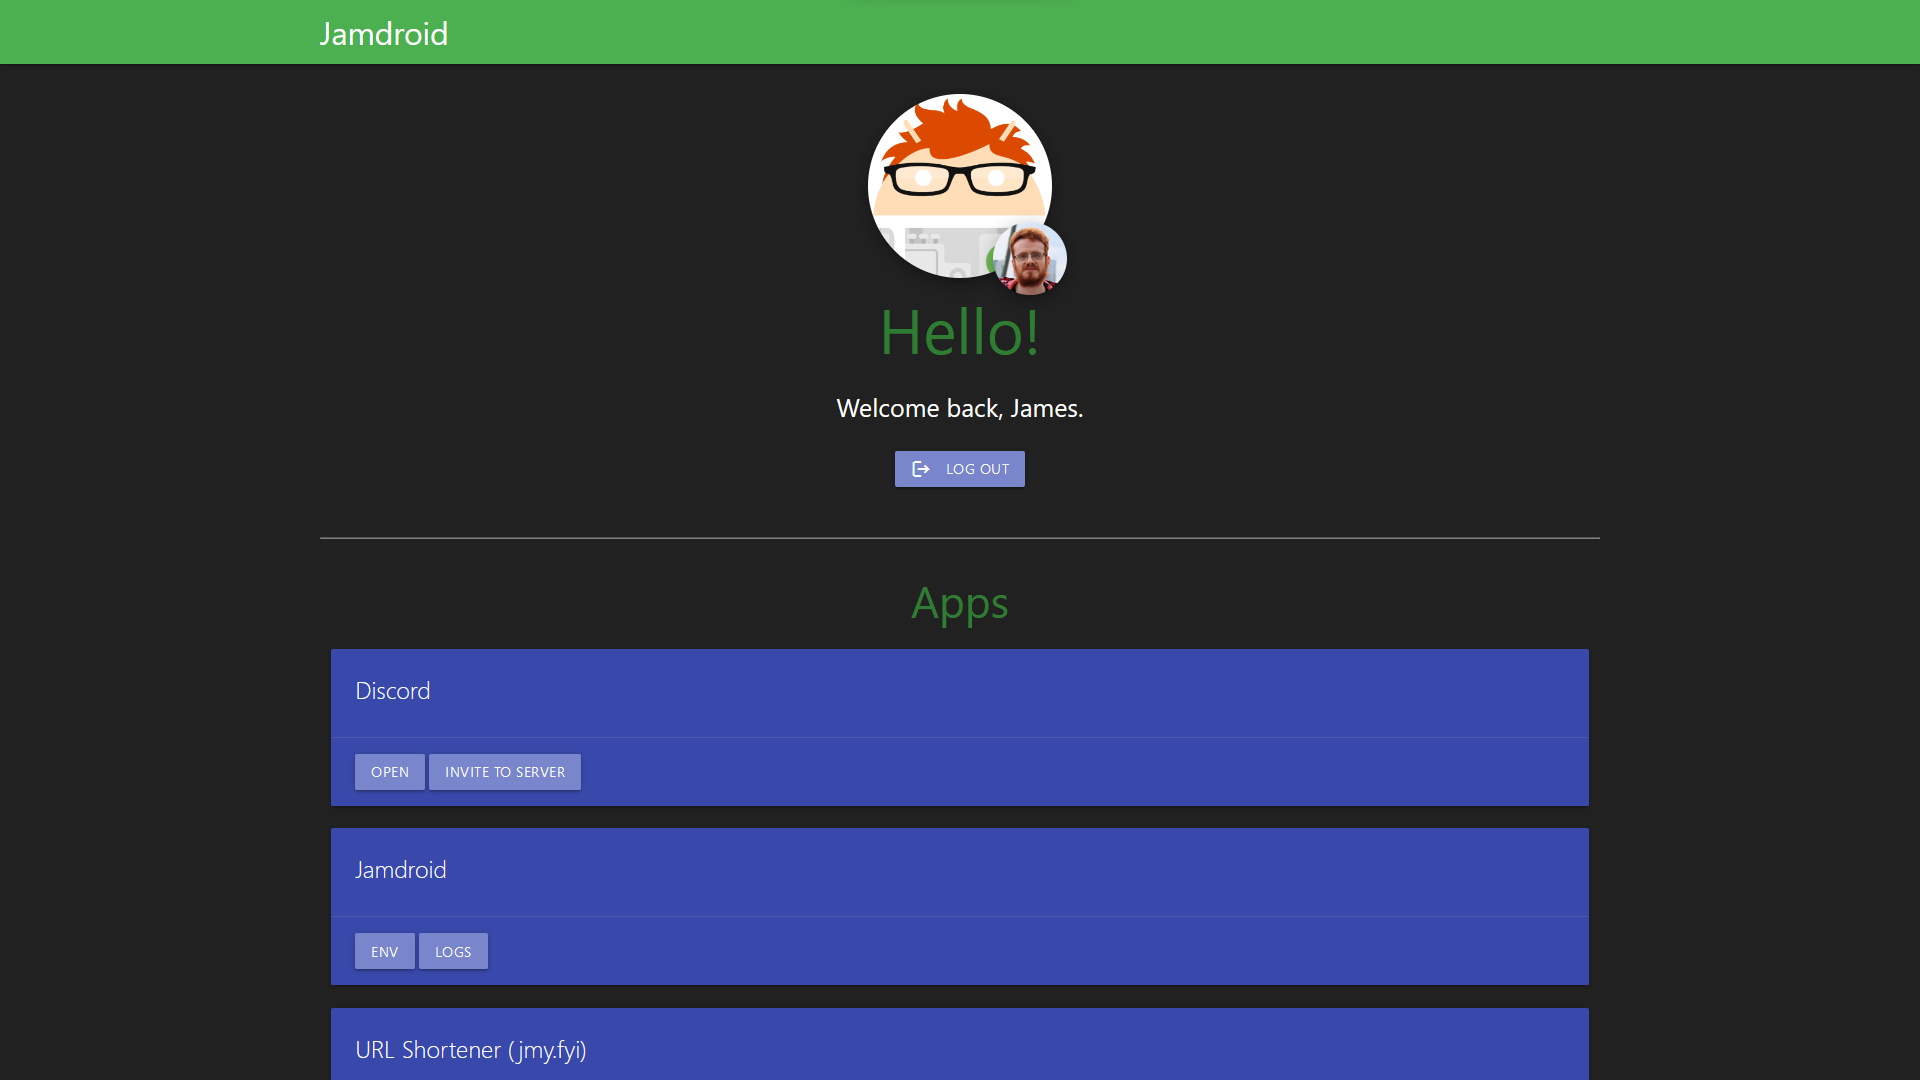 A screenshot of the website Jamdro.id. At the top of the page is a message welcoming James, the current logged in user. Application boxes for "Discord", "Jamdroid" and "URL Shortener (jmy.fyi)" are visible.